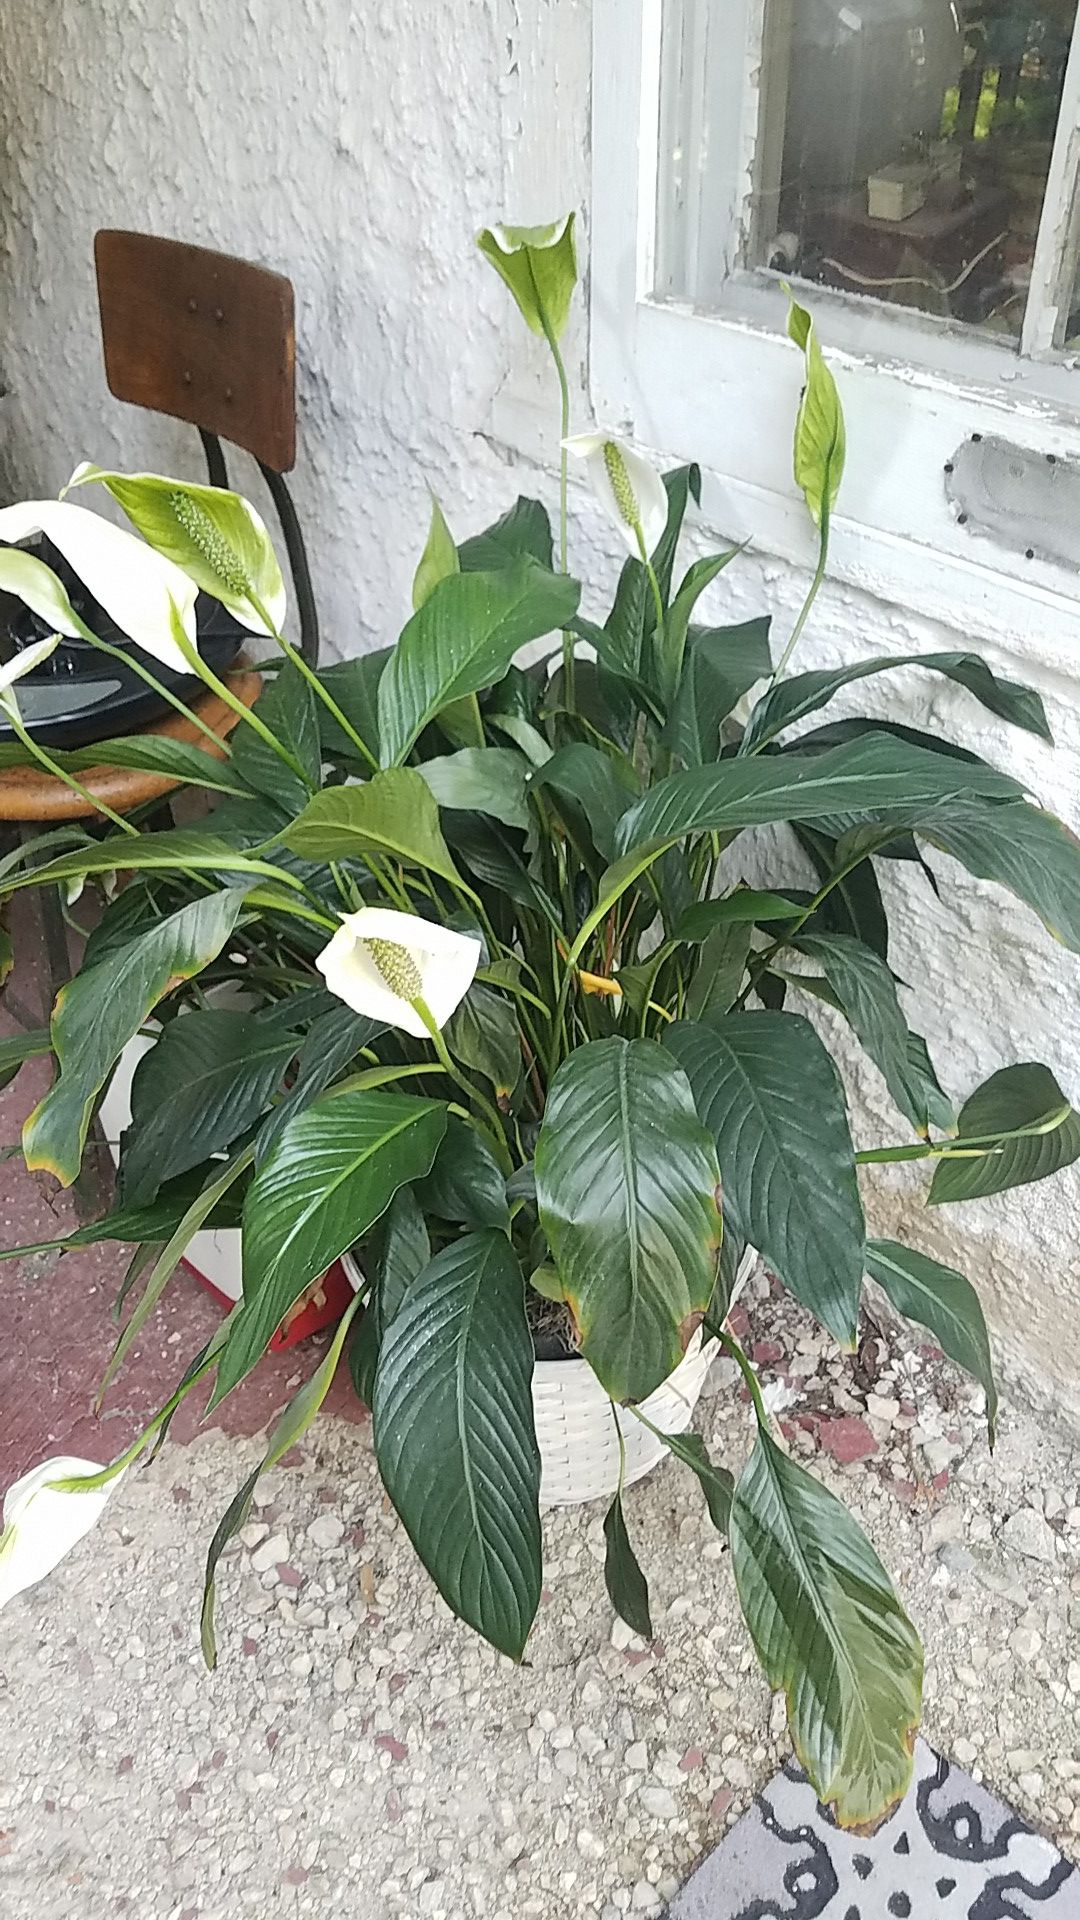 Large peace lily house plant in basket